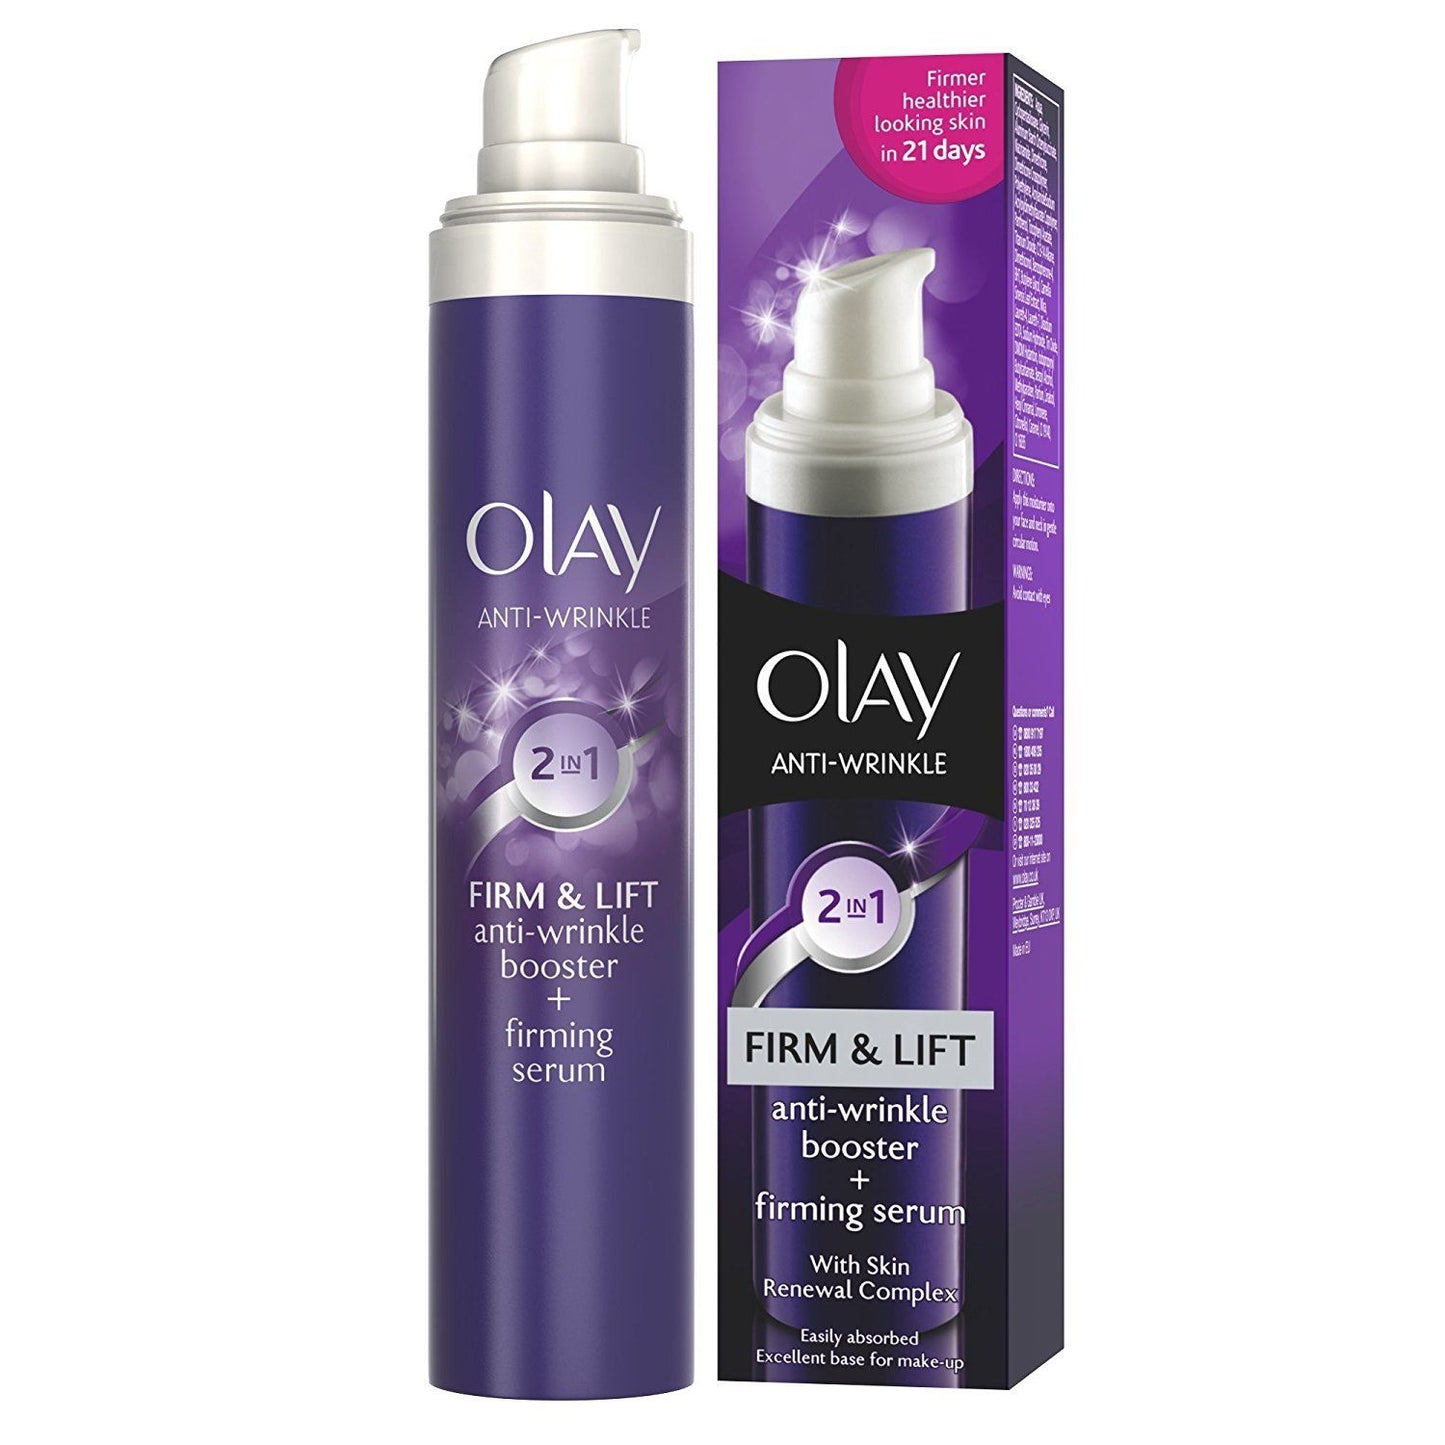 Olay Anti Wrinkle 2in1 Firm & Lift Day Cream + Serum 50ml (3 pack)